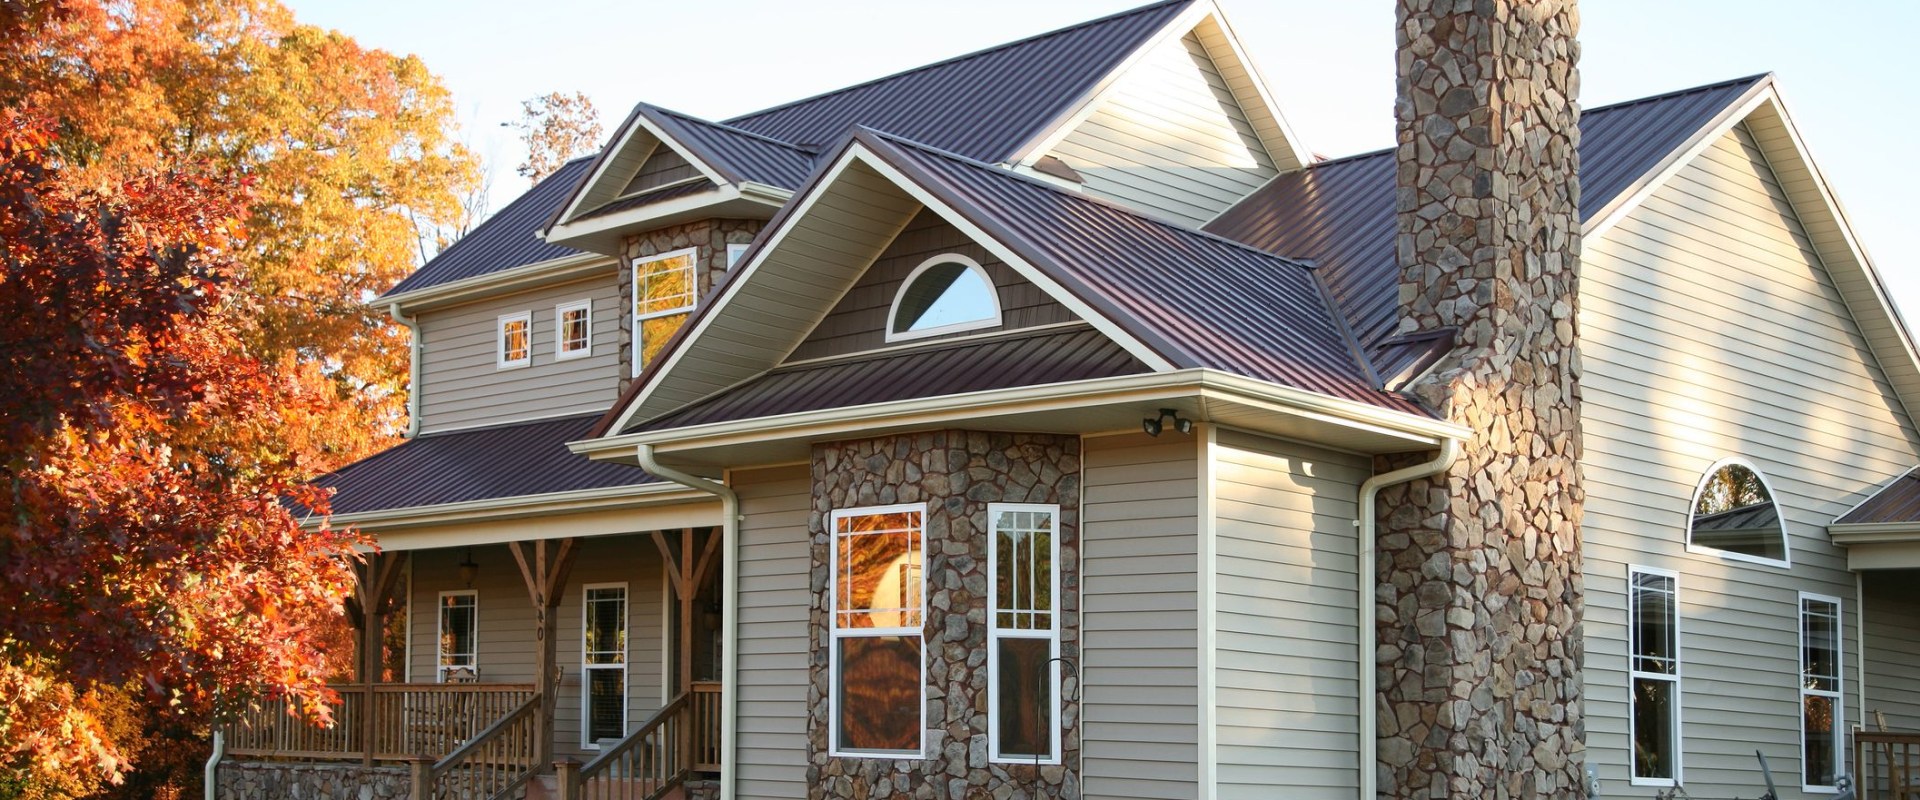 How to Find Quality Materials and Workmanship for Your Roofing and Siding Needs